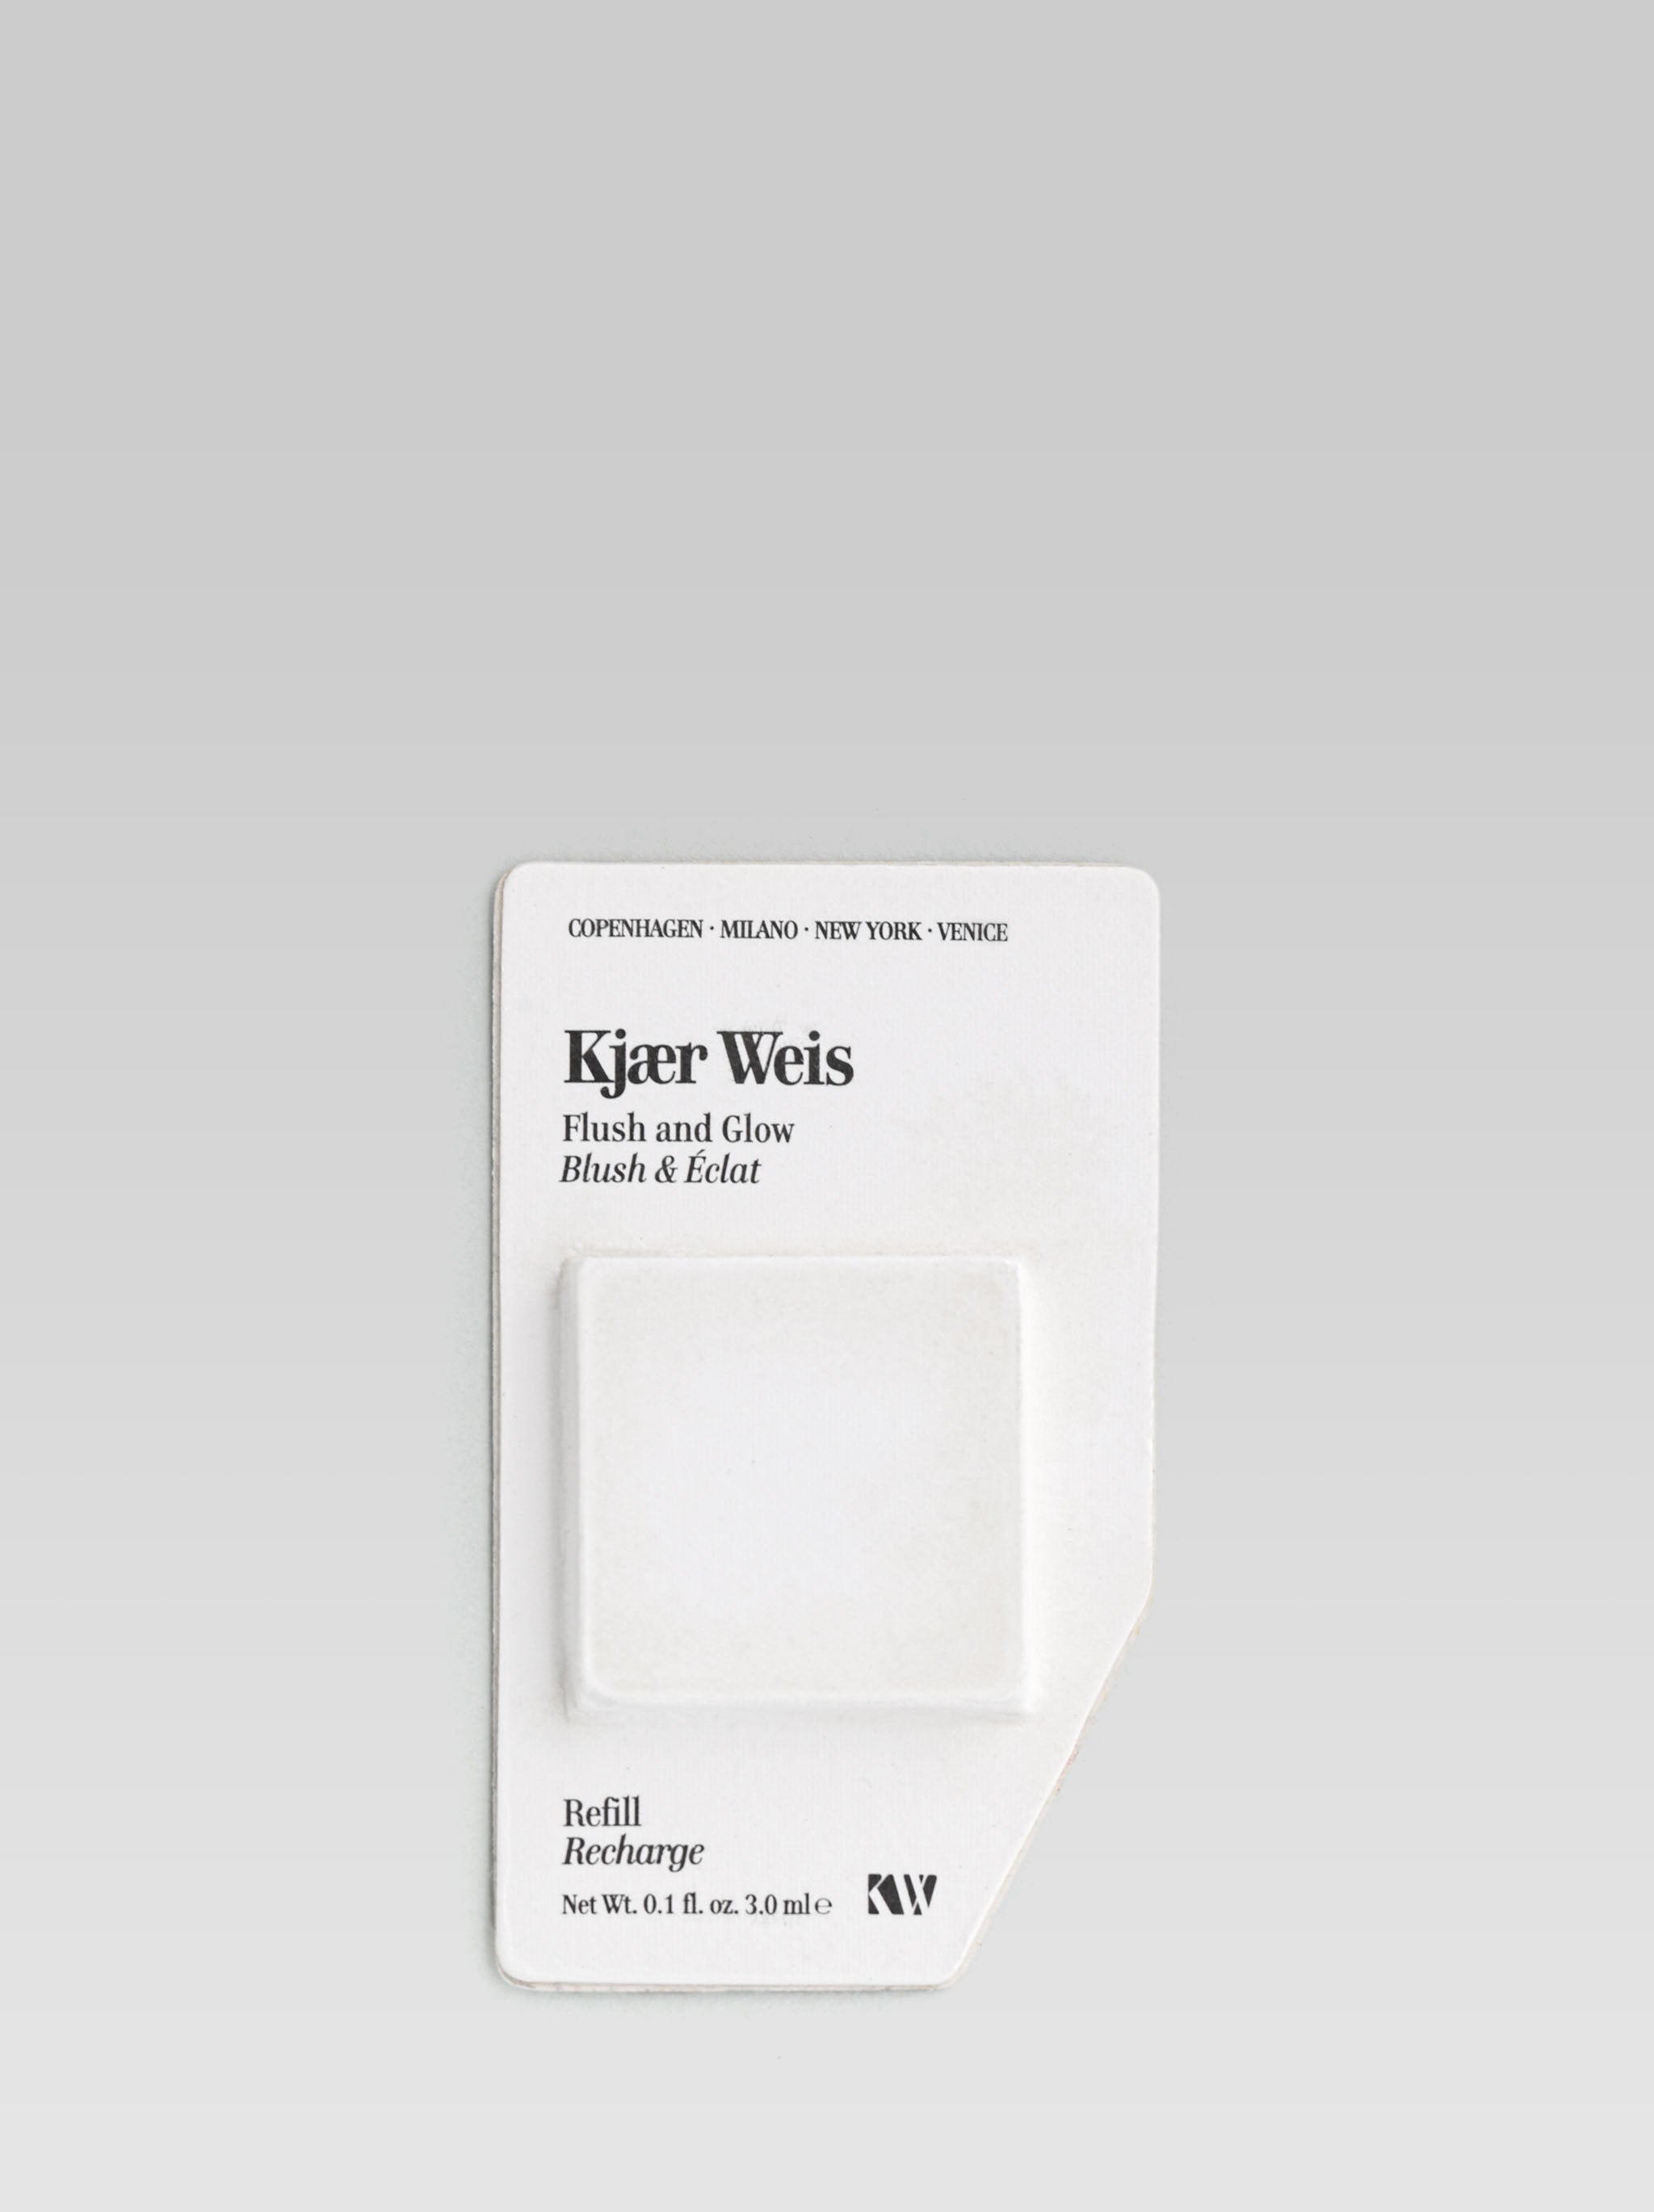 KJAER WEIS Flush and Glow Duo Refill product shot